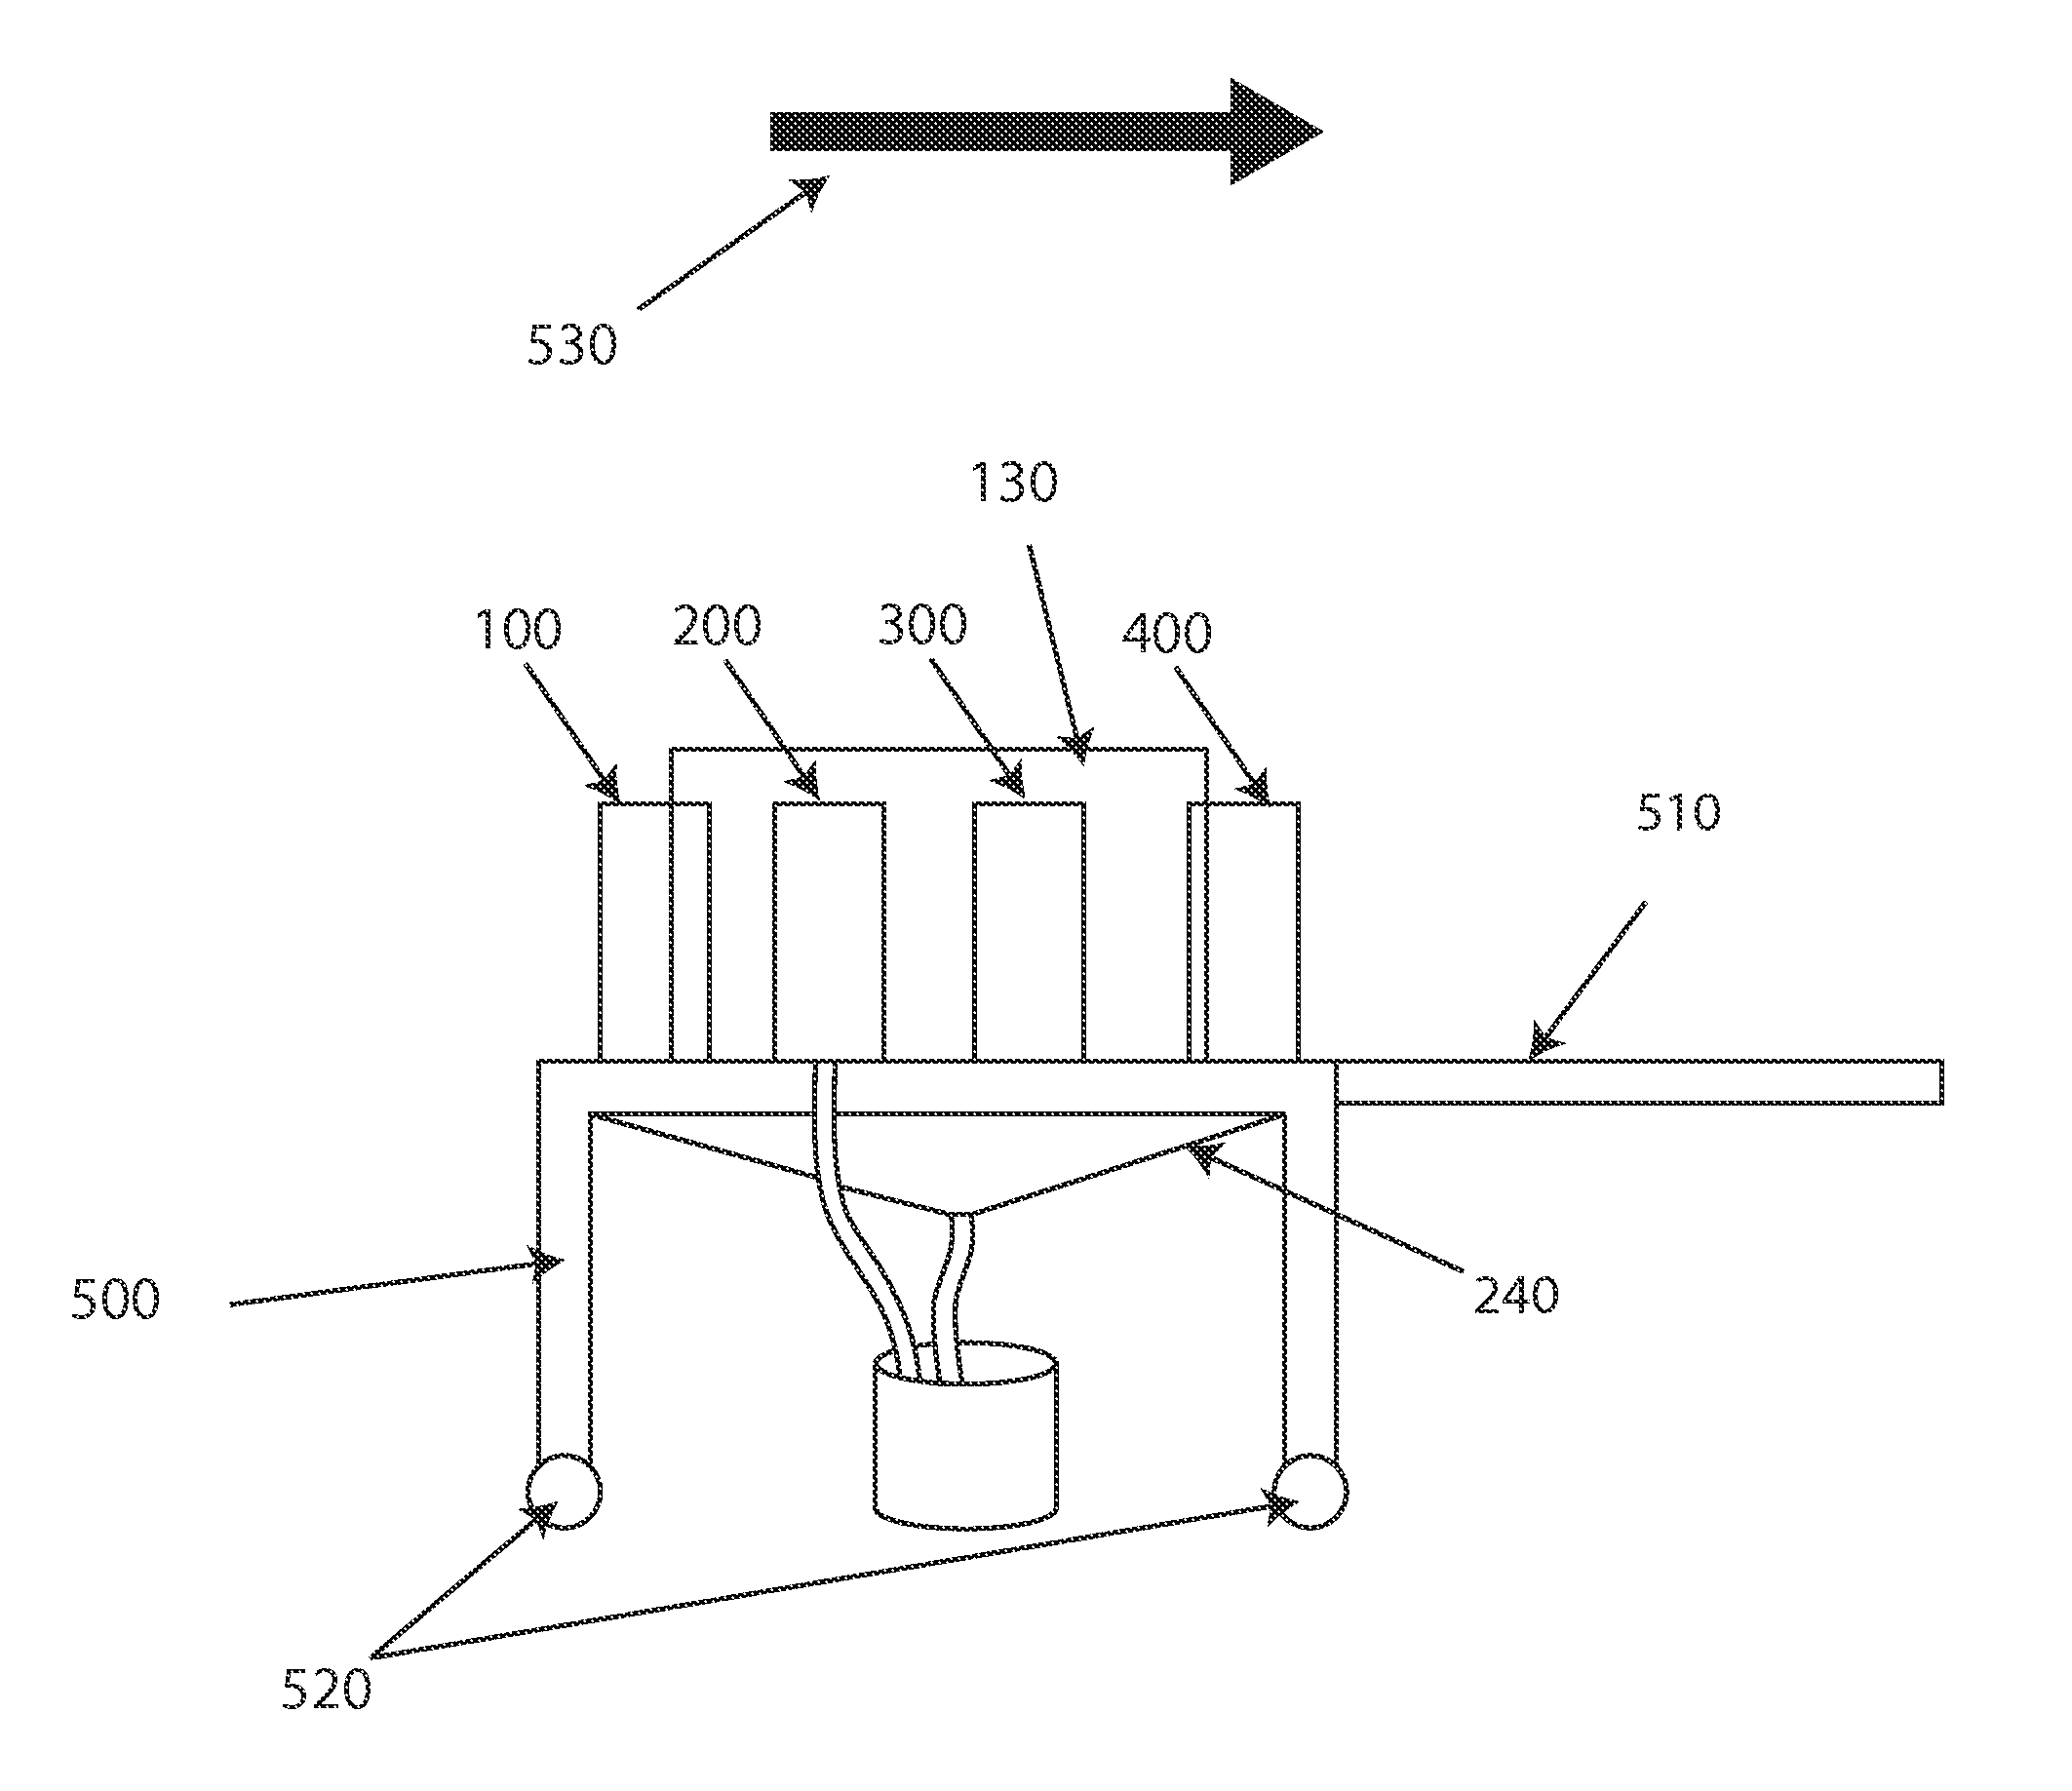 Apparatus and Process for Applying Liquid to an Object